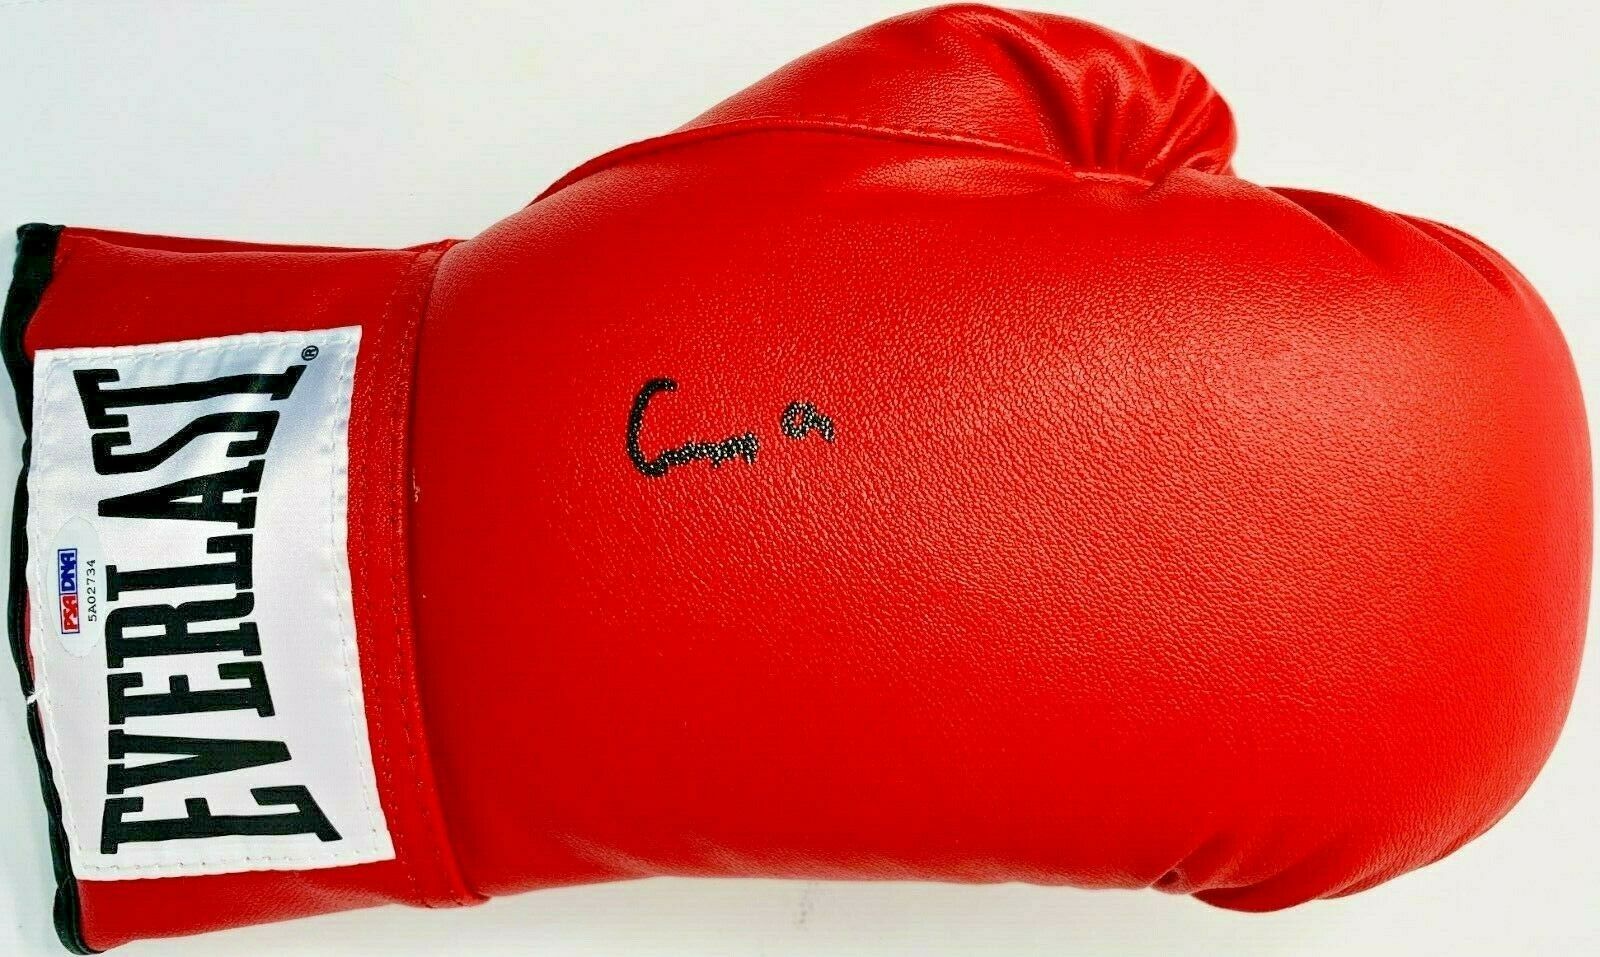 Muhammad Ali Signed Leather Everlast Boxing Glove Graded 10 Psa Itp 5a02734